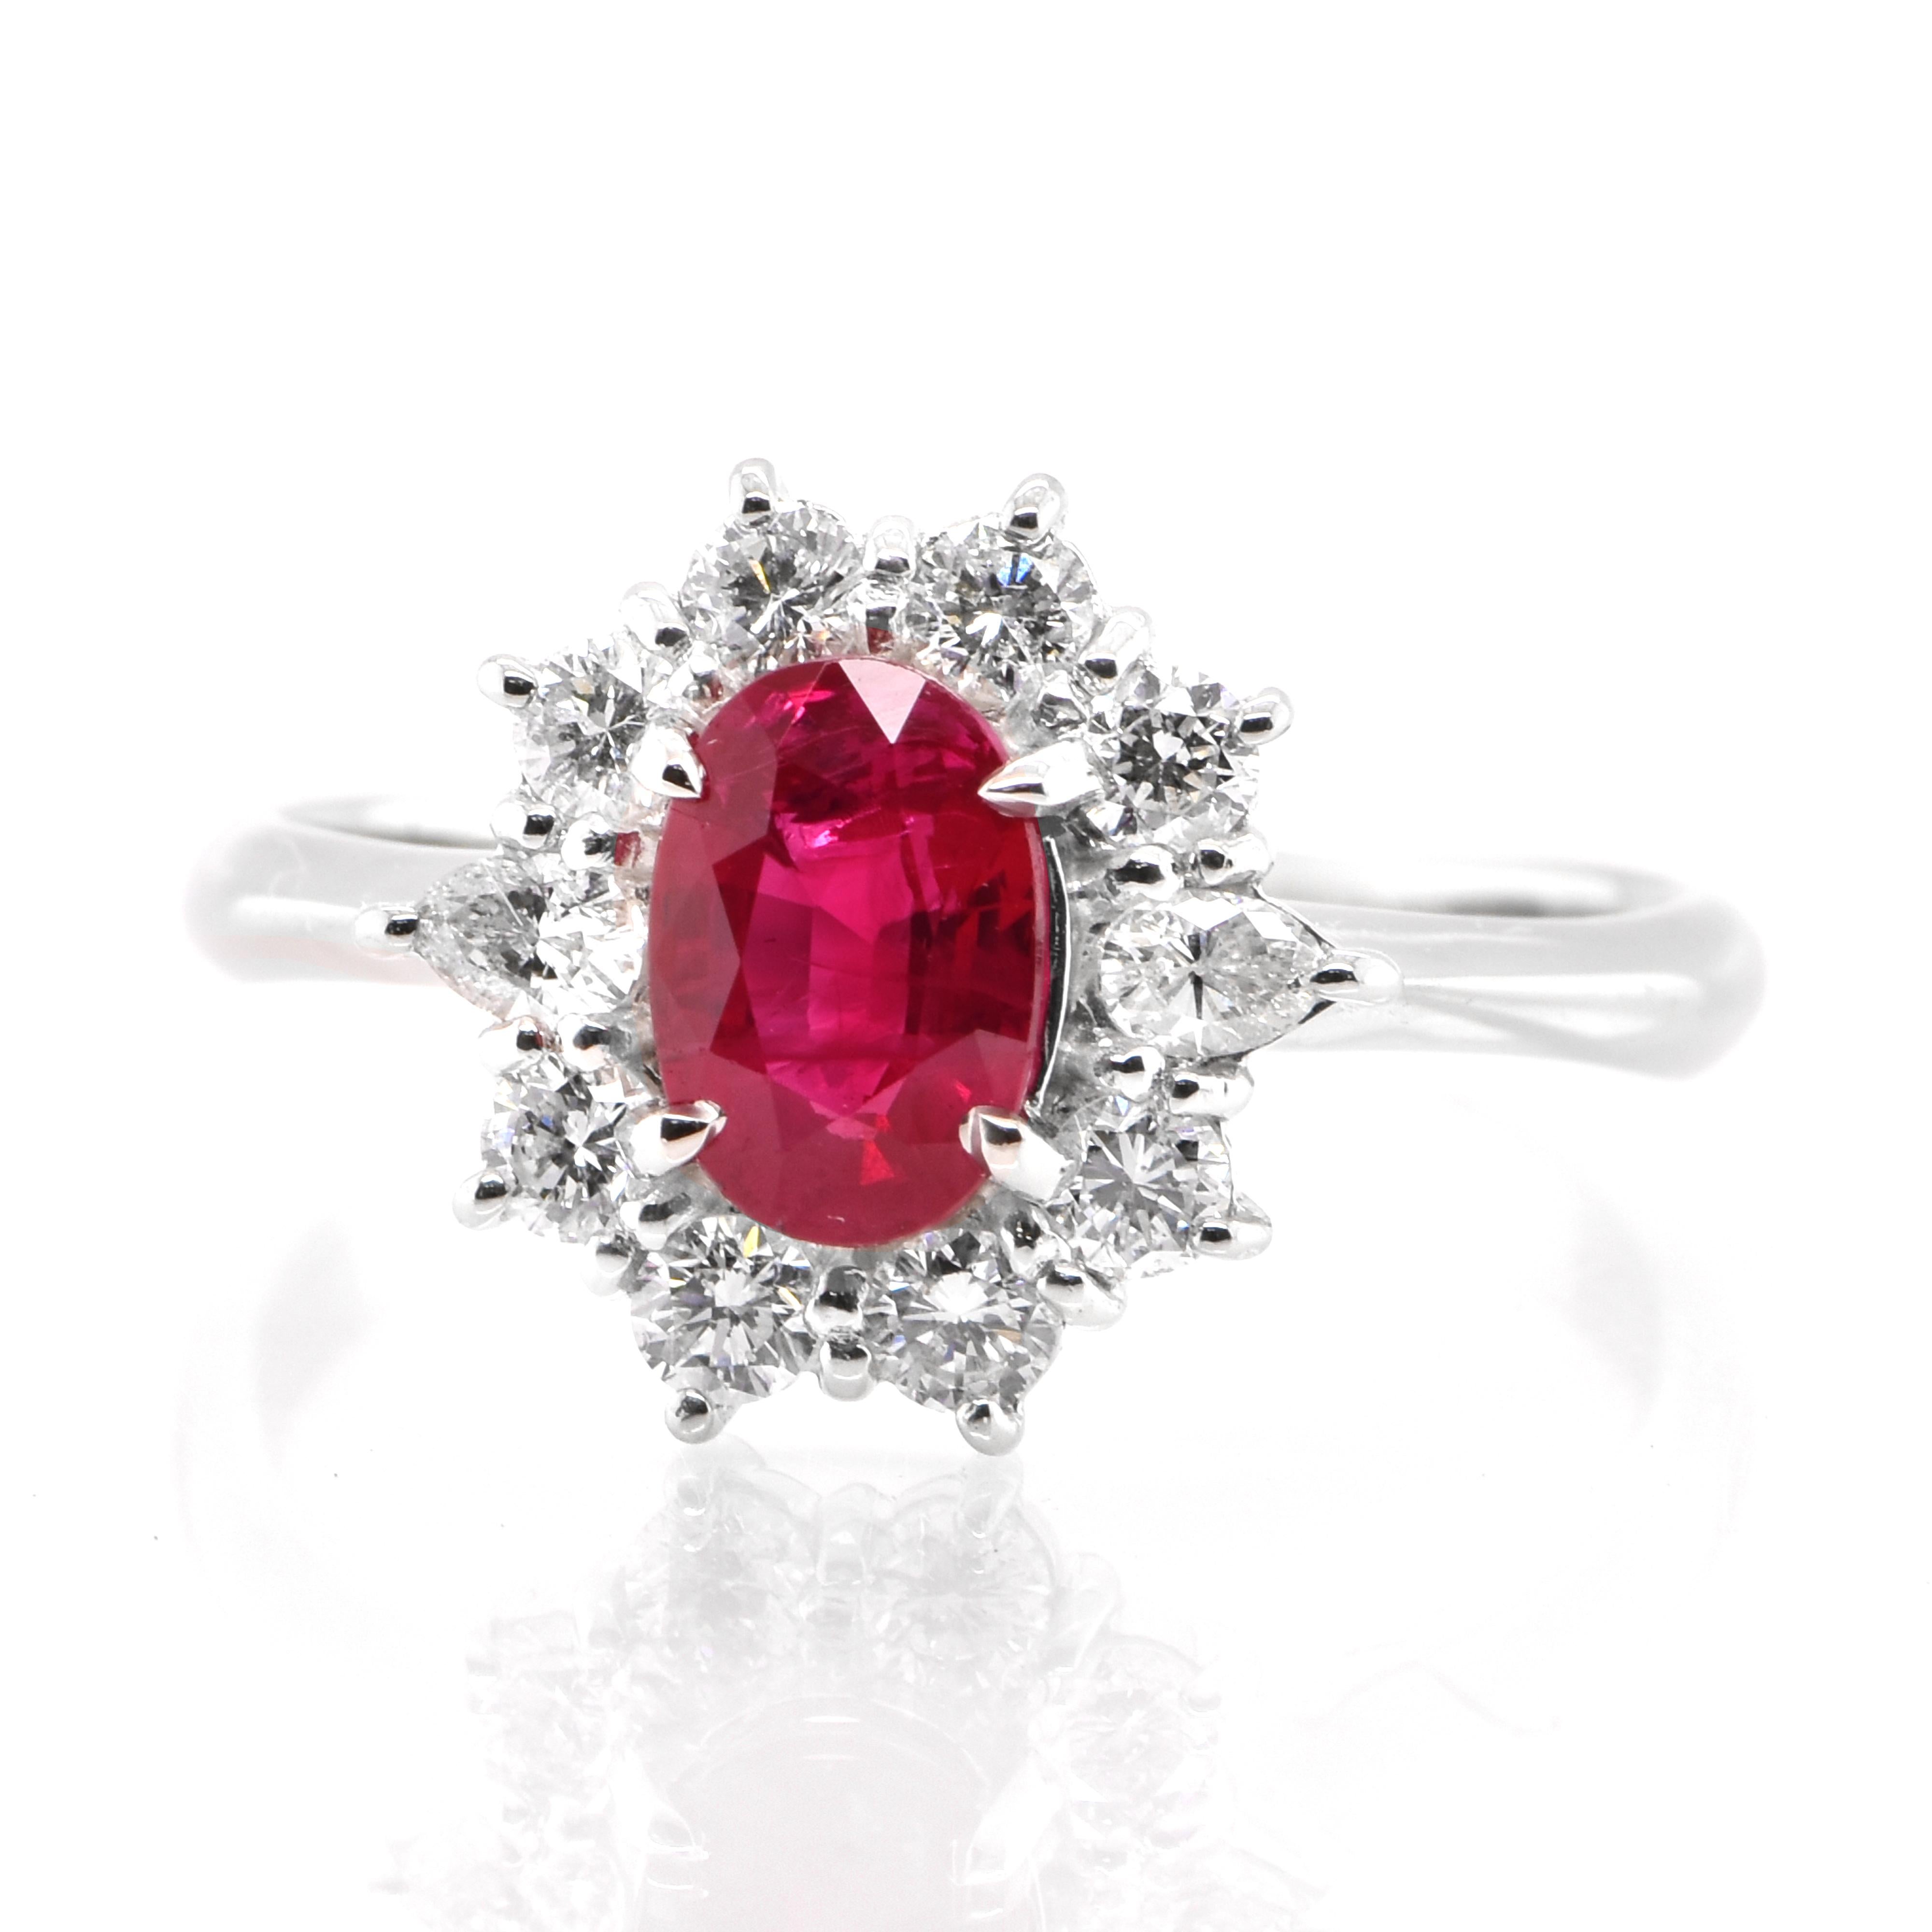 A beautiful Engagement Ring set in Platinum featuring a 1.32 Carat, Natural Ruby and 0.61 Carats of Diamond Accents. Rubies are referred to as 